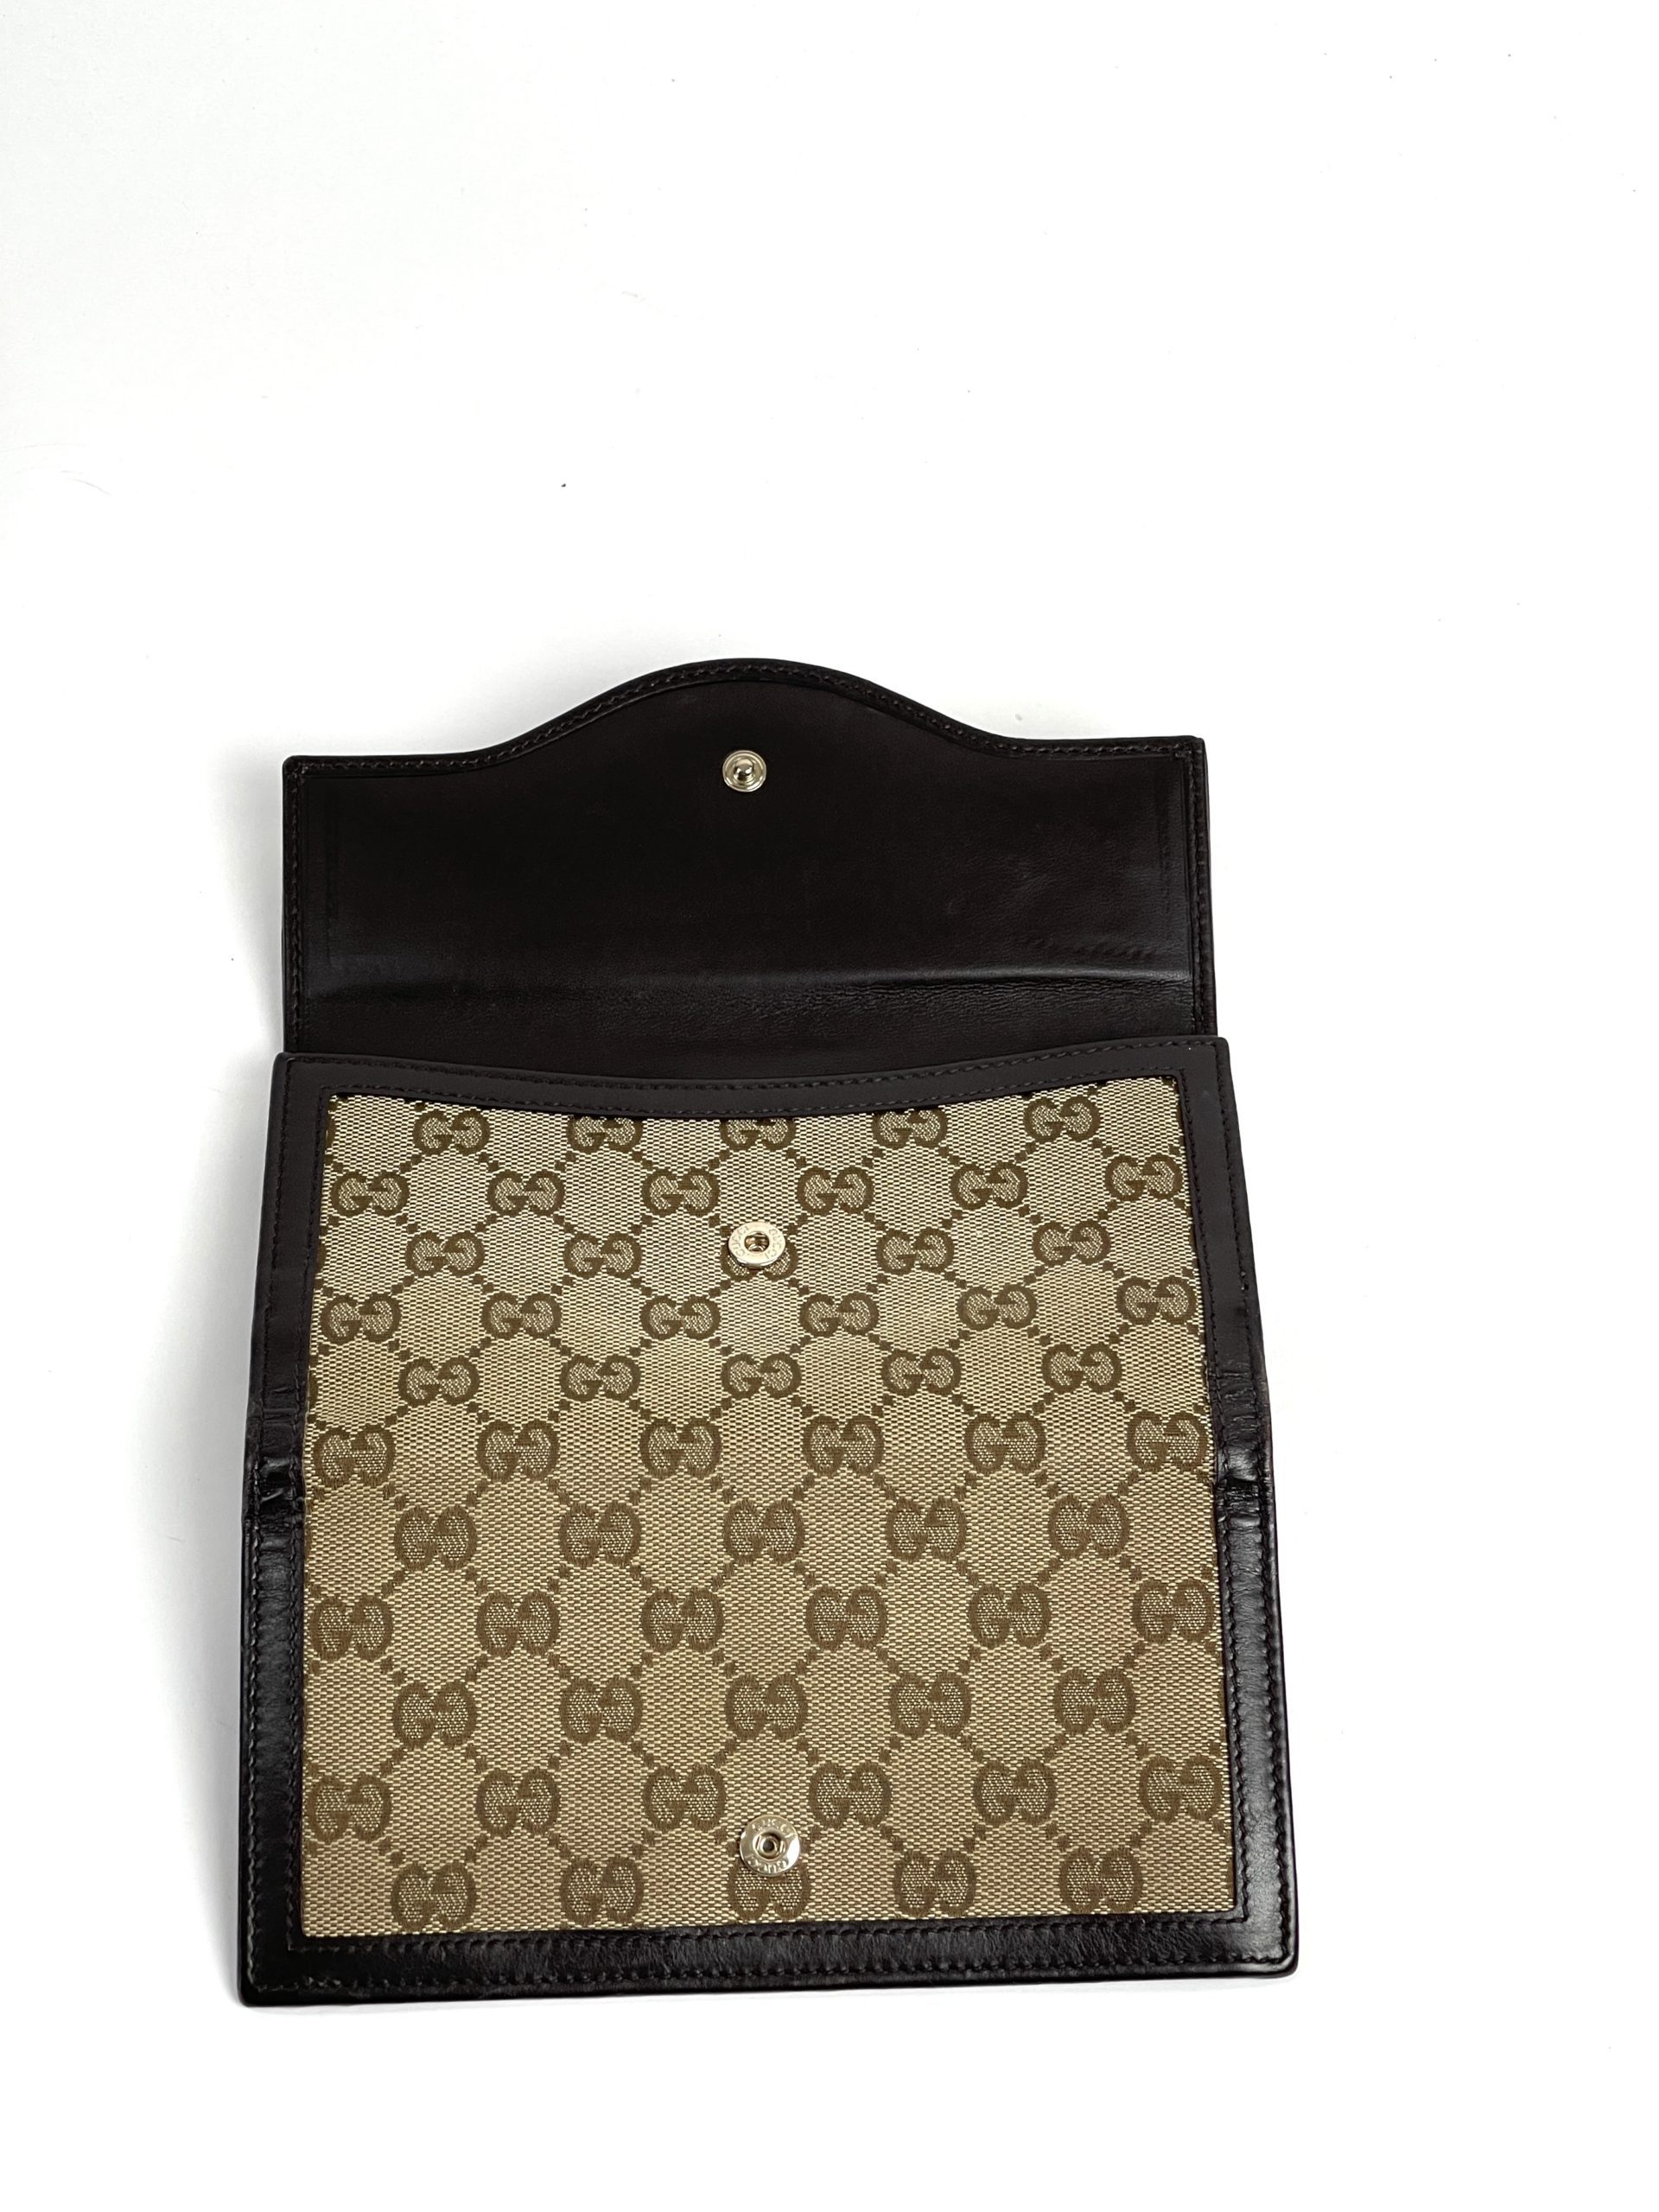 GG Marmont medium wallet in black leather and GG Supreme